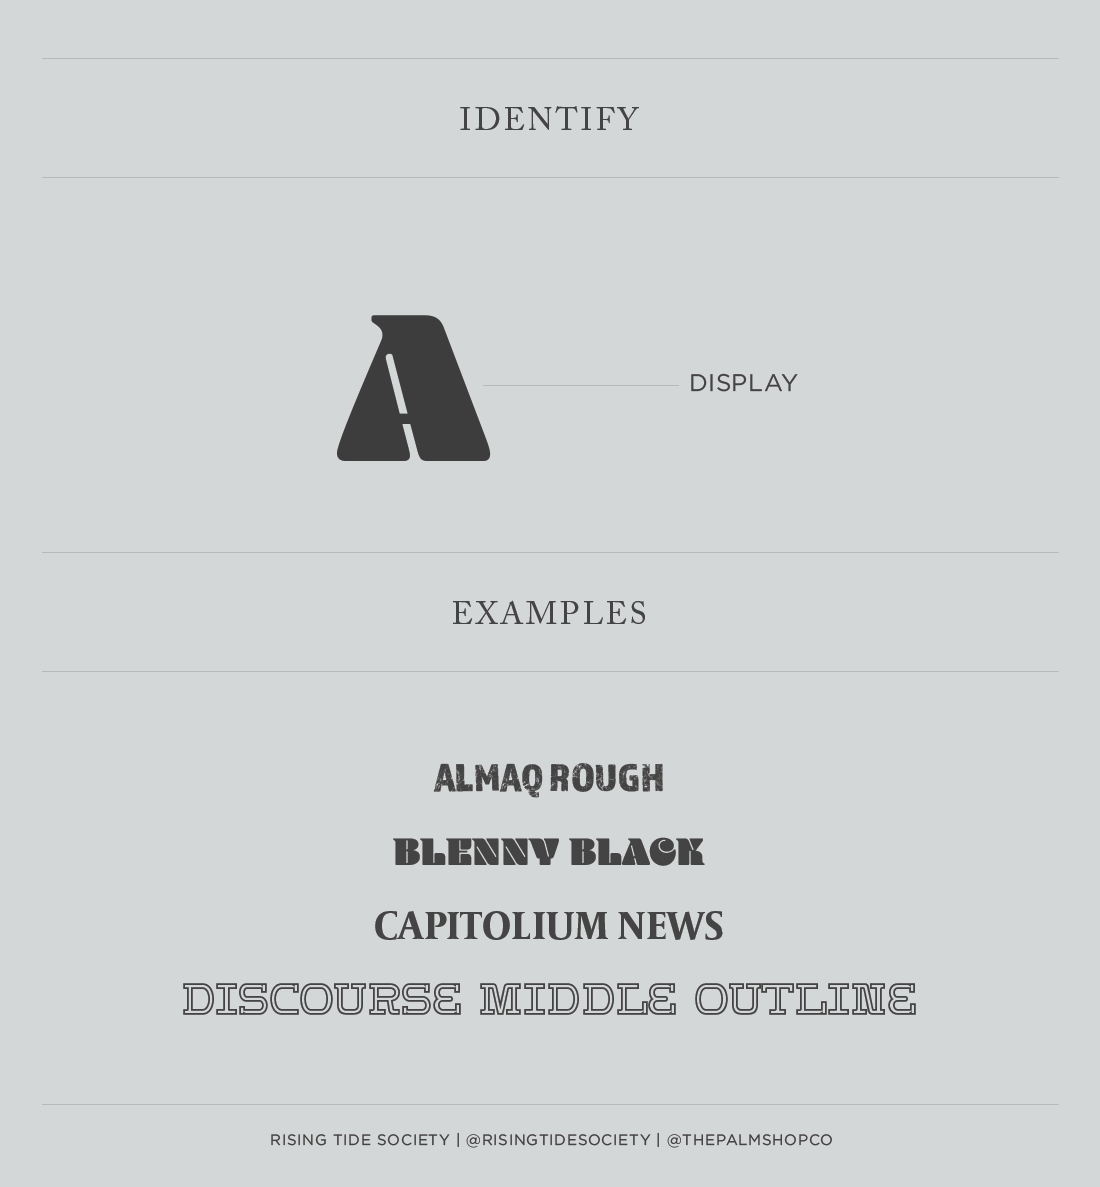 Display font guide by the Rising Tide Society